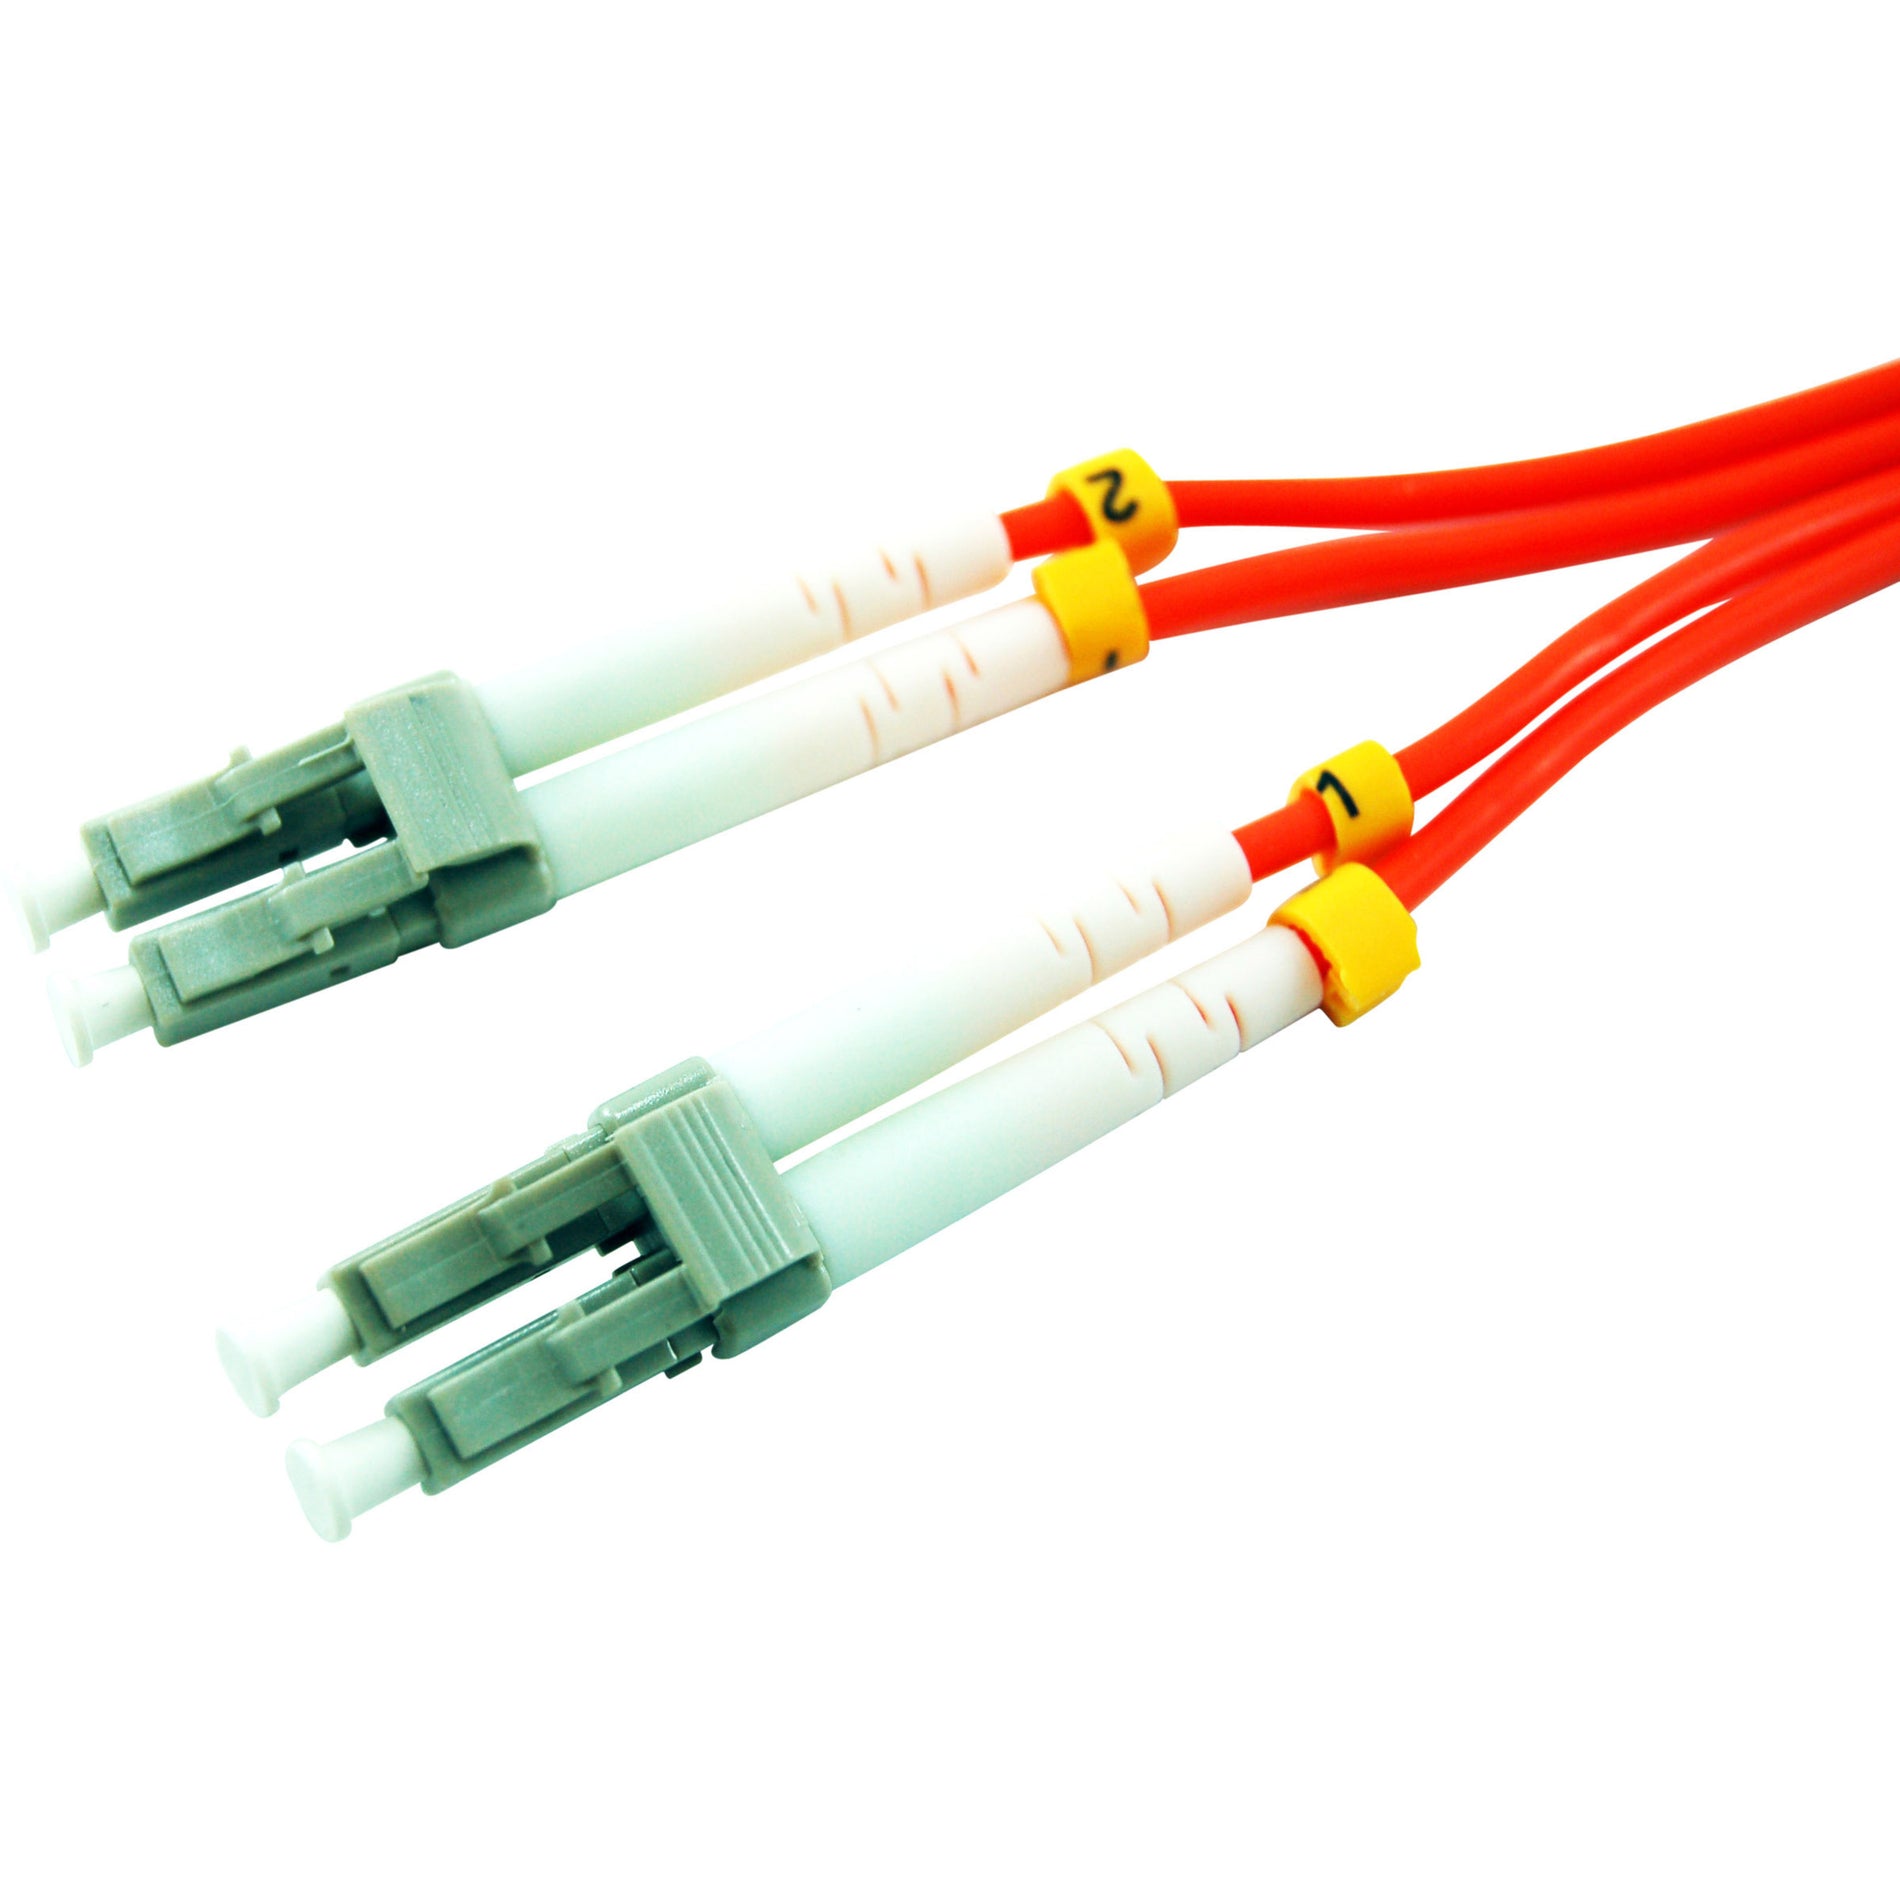 Comprehensive LC-LC-MM-20M 20M LC Multimode 3.0mm Duplex Network Cable, Riser Rated, 1 Gbit/s Data Transfer Rate